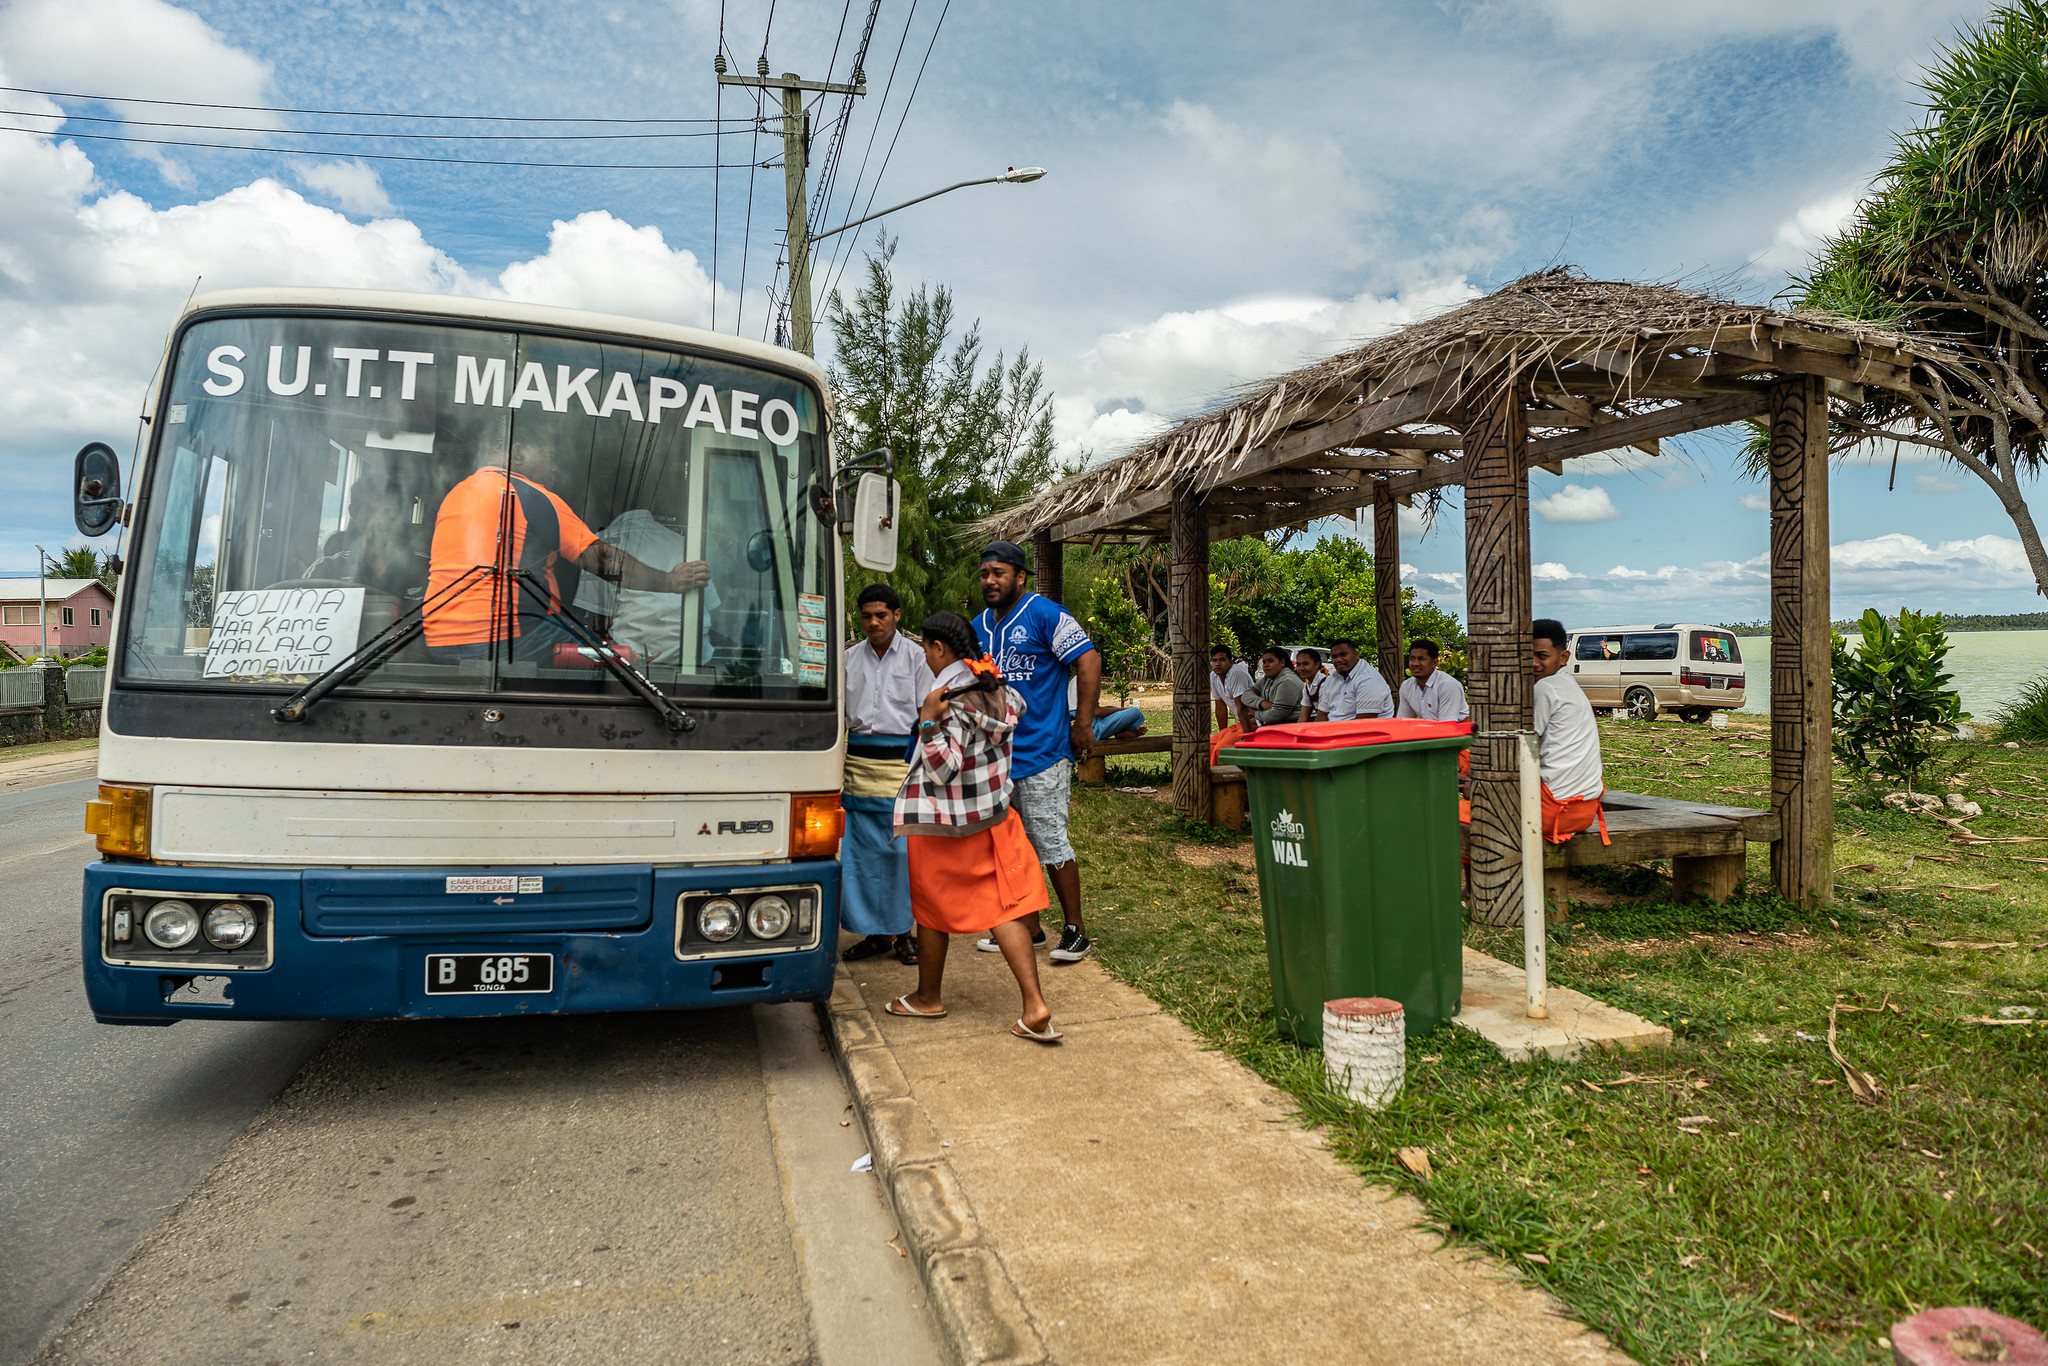 Getting on the bus in Tonga (Asian Development Bank-Flickr)